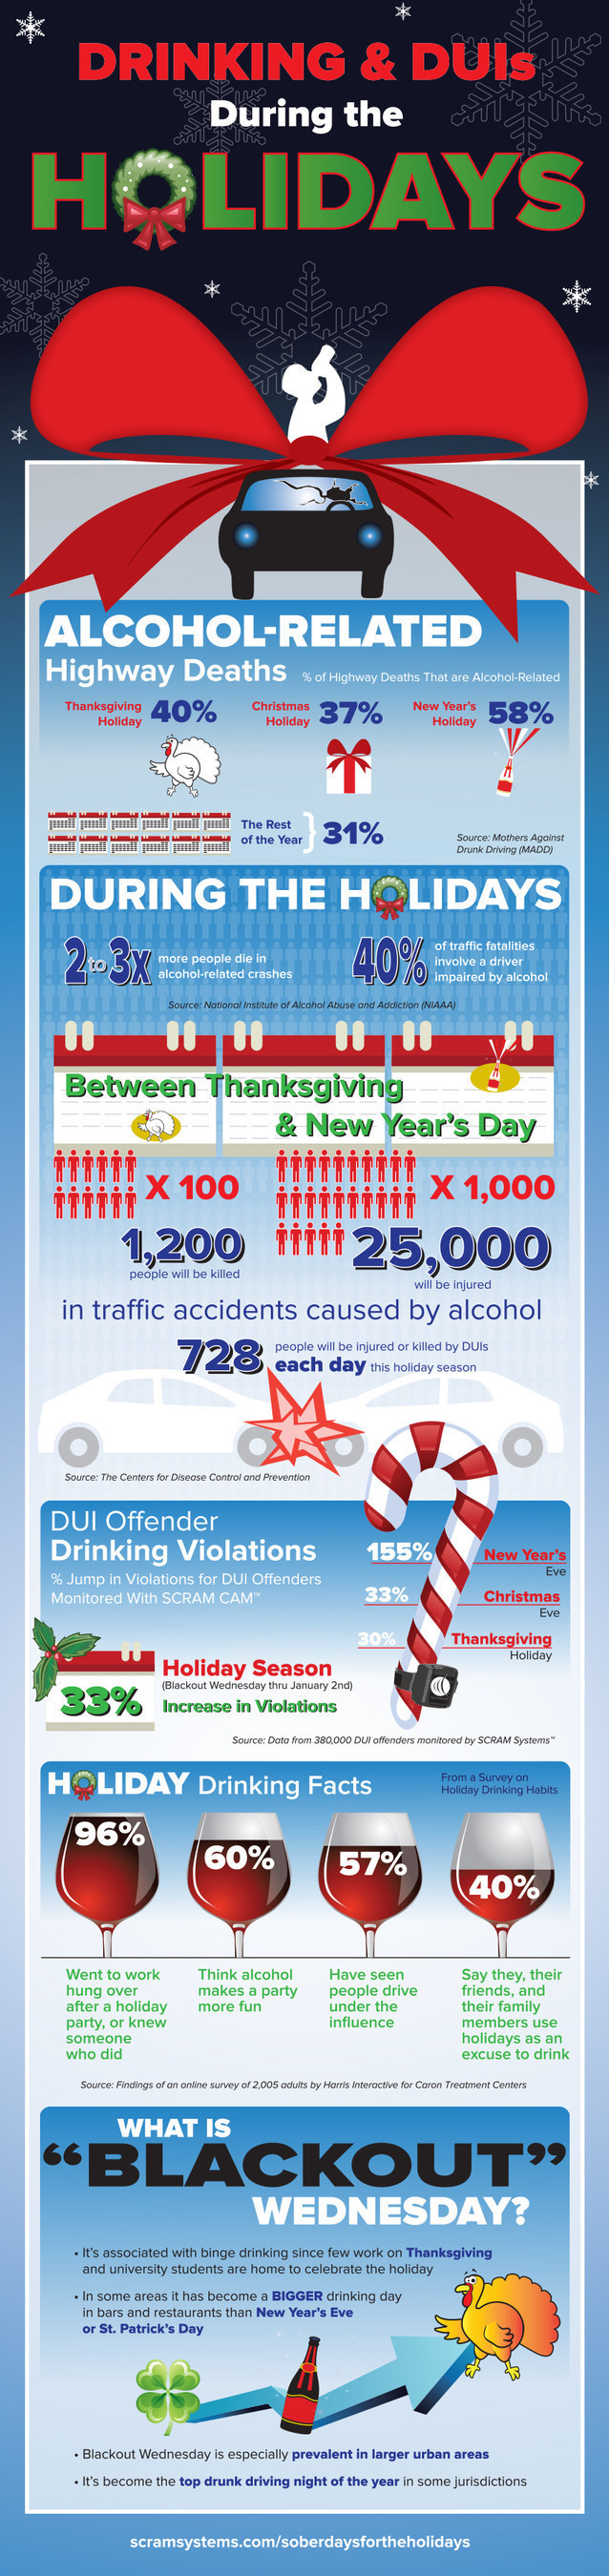 Infographic from Alcohol Monitoring Systems highlights alarming increases in binge drinking, DUIs between Thanksgiving eve and New Year's Day.